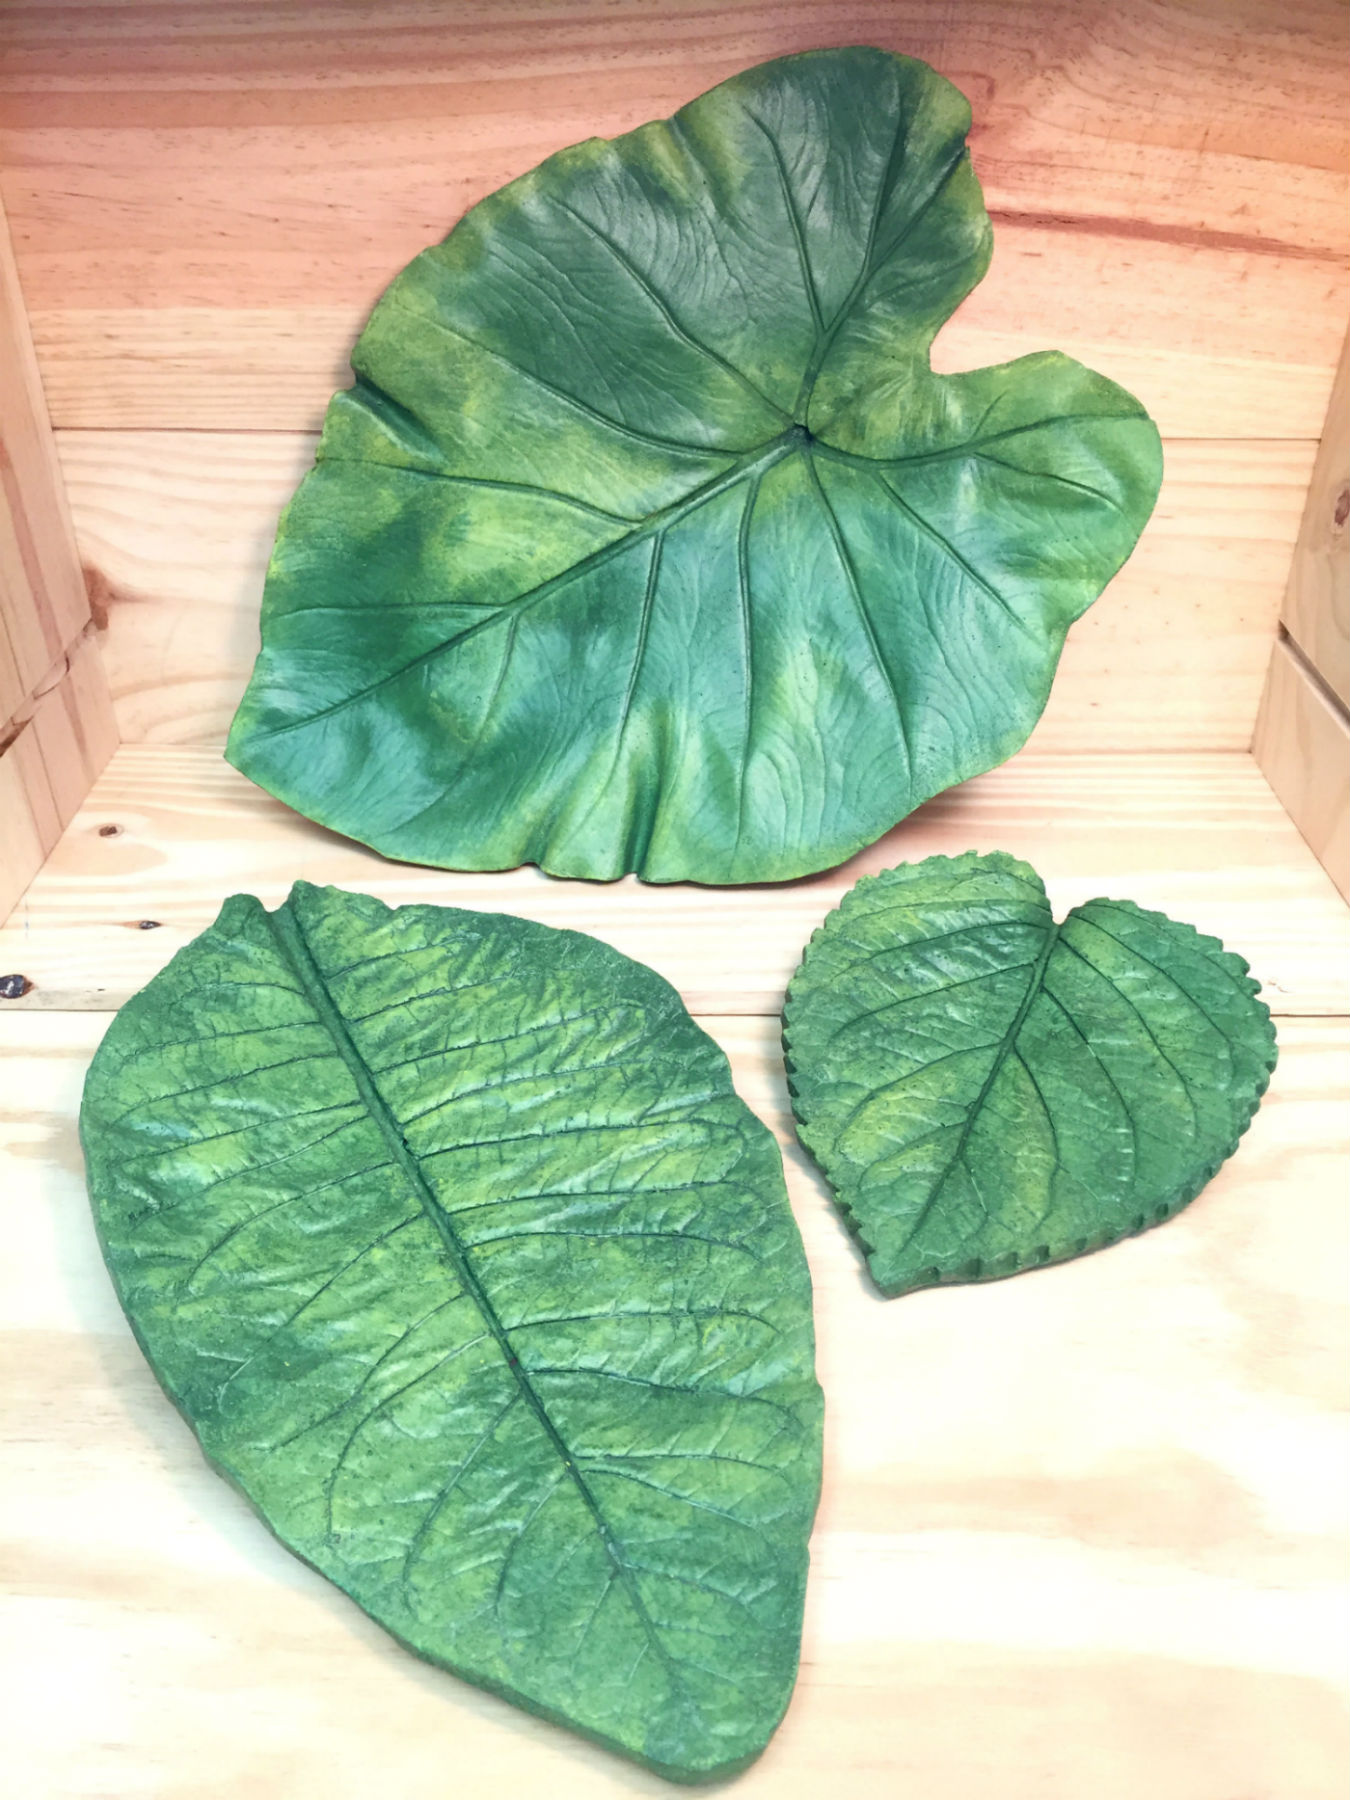 Three leaf plates that are painted green and vary in size from small to large